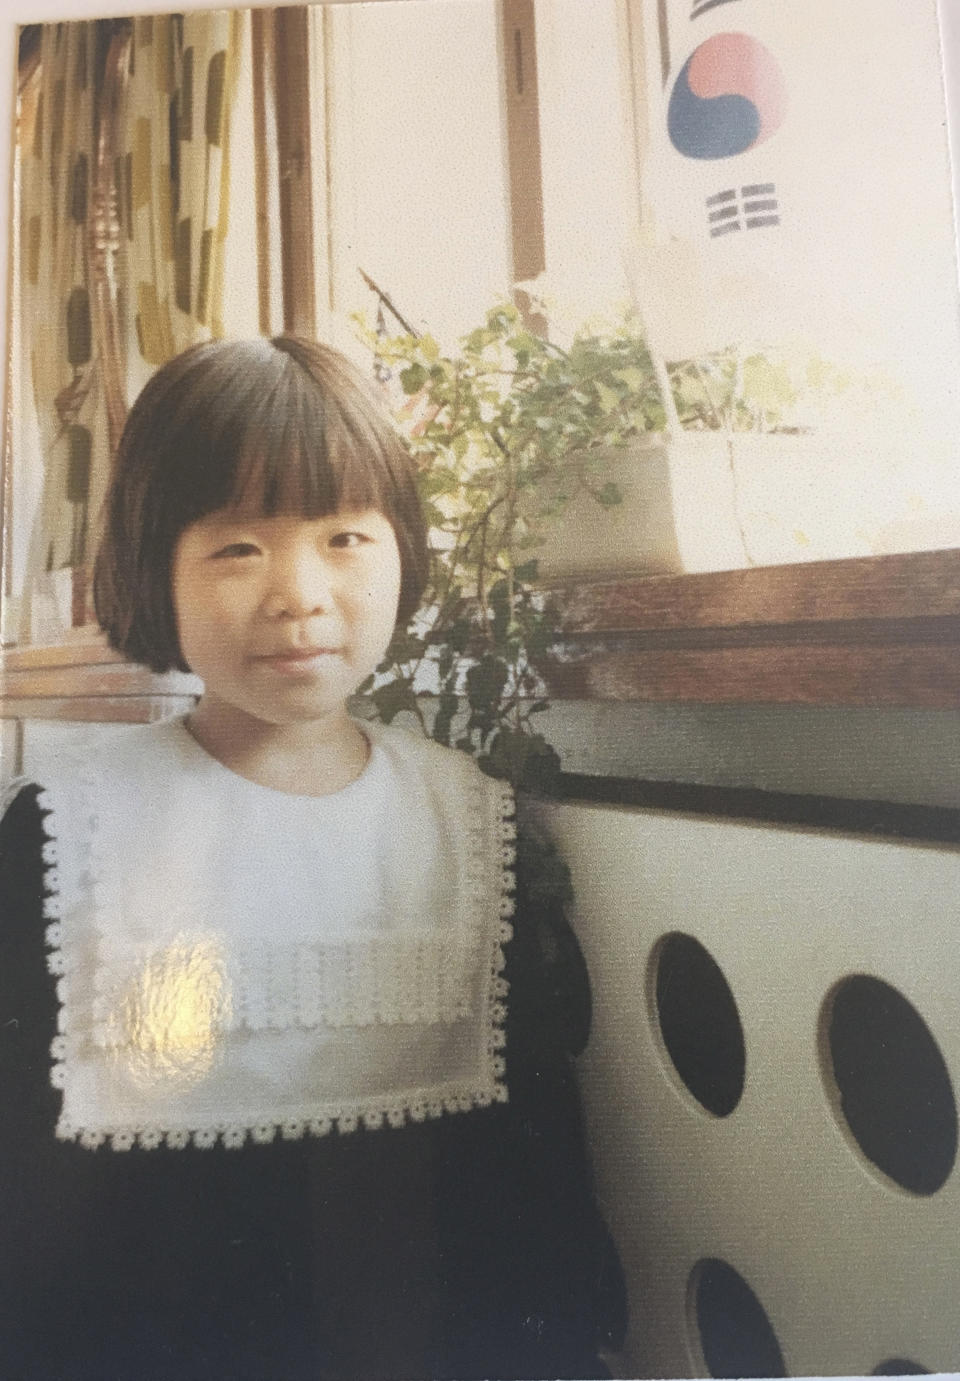 This undated photo provided by Joo-Rei Mathieson shows herself when she was in childhood taken in South Korea. A Brothers Home intake document describes Mathieson as a lost street kid brought in by police. It notes, chillingly for a government-sponsored vagrants’ facility that survivors have told The Associated Press often worked children to death, that she's “capable of labor.” She spoke no words for days, the document says, after entering Brothers, a now-destroyed facility in the southern port city of Busan where thousands of children and adults, most of whom were grabbed off the streets, were enslaved and often killed, raped and beaten in the 1970s and 1980s. (Courtesy of Joo-Rei Mathieson via AP)